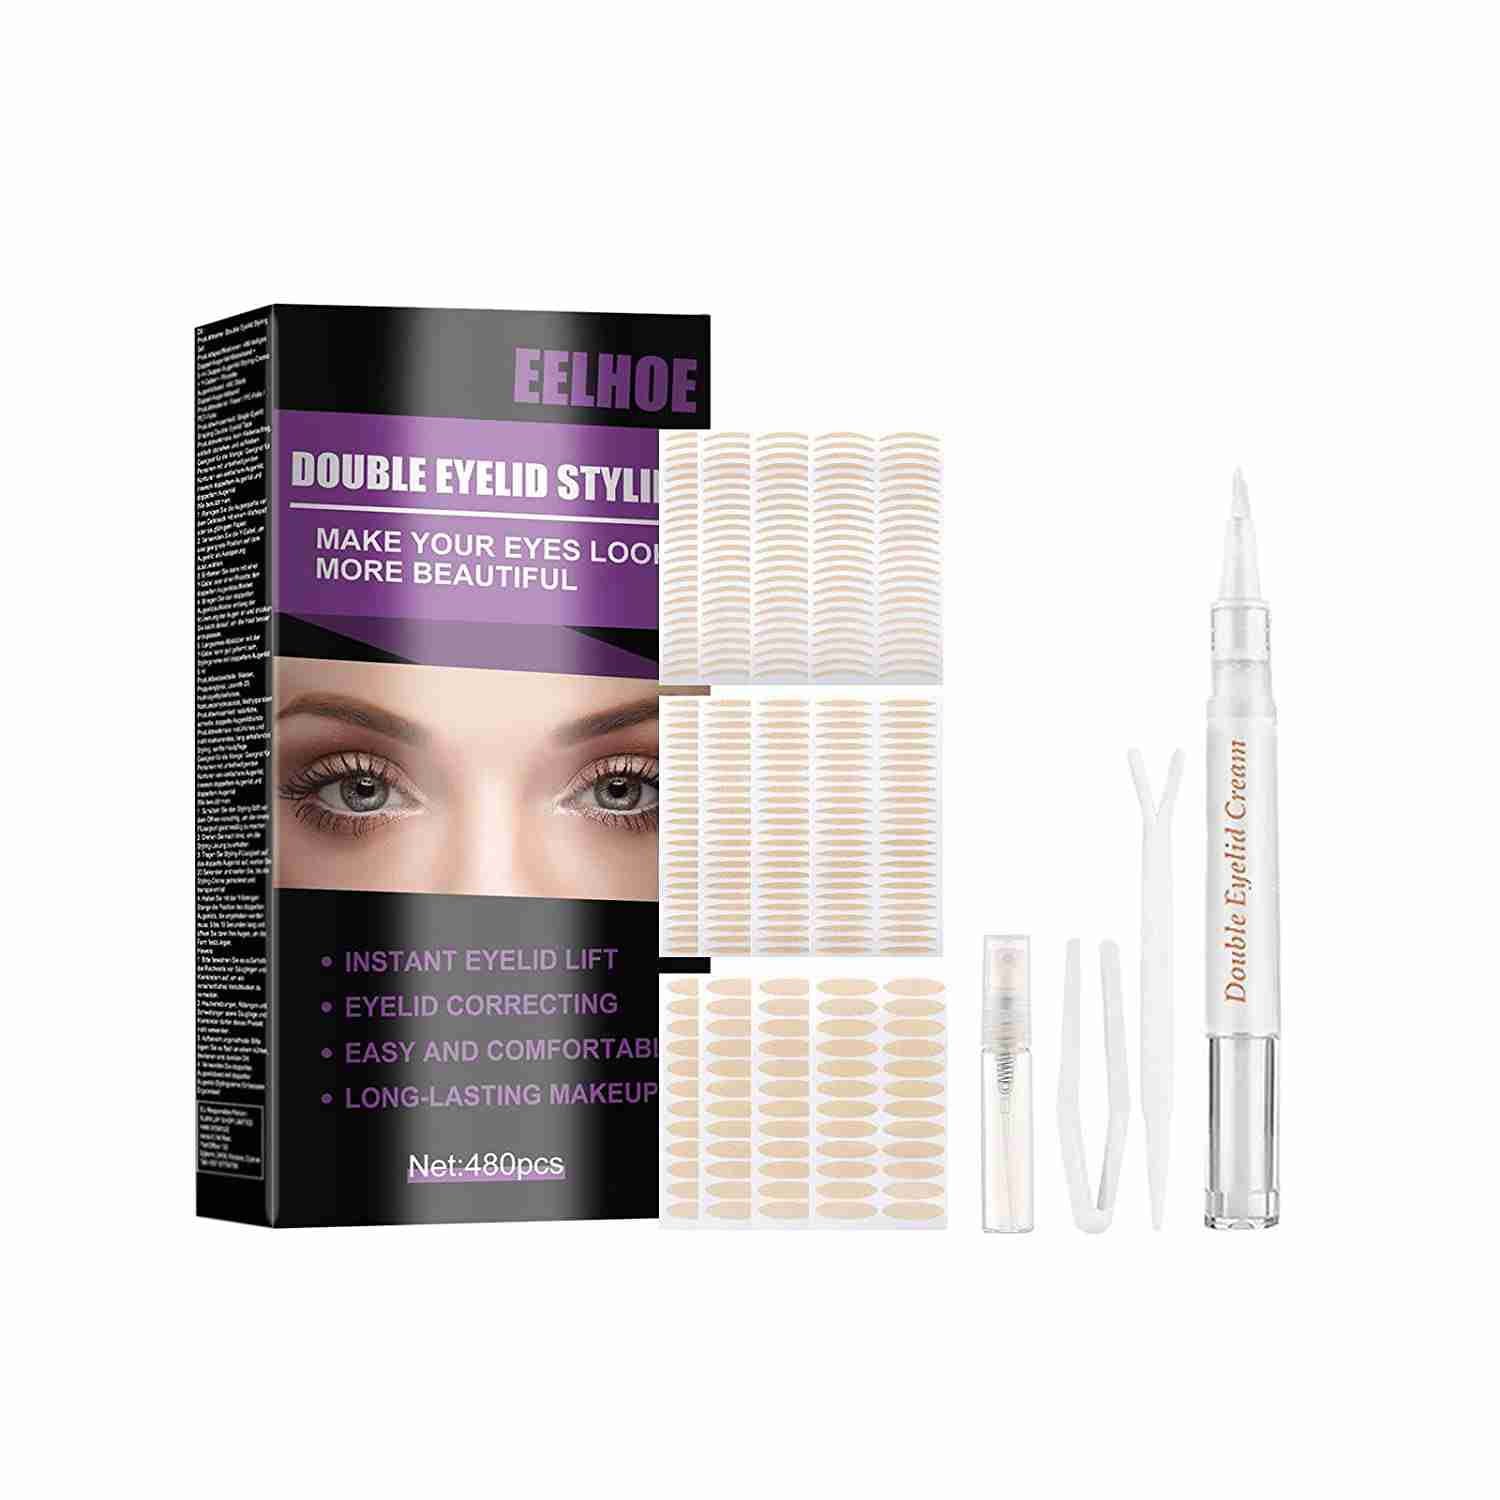 eyelid-lifter-strips with cash back rebate